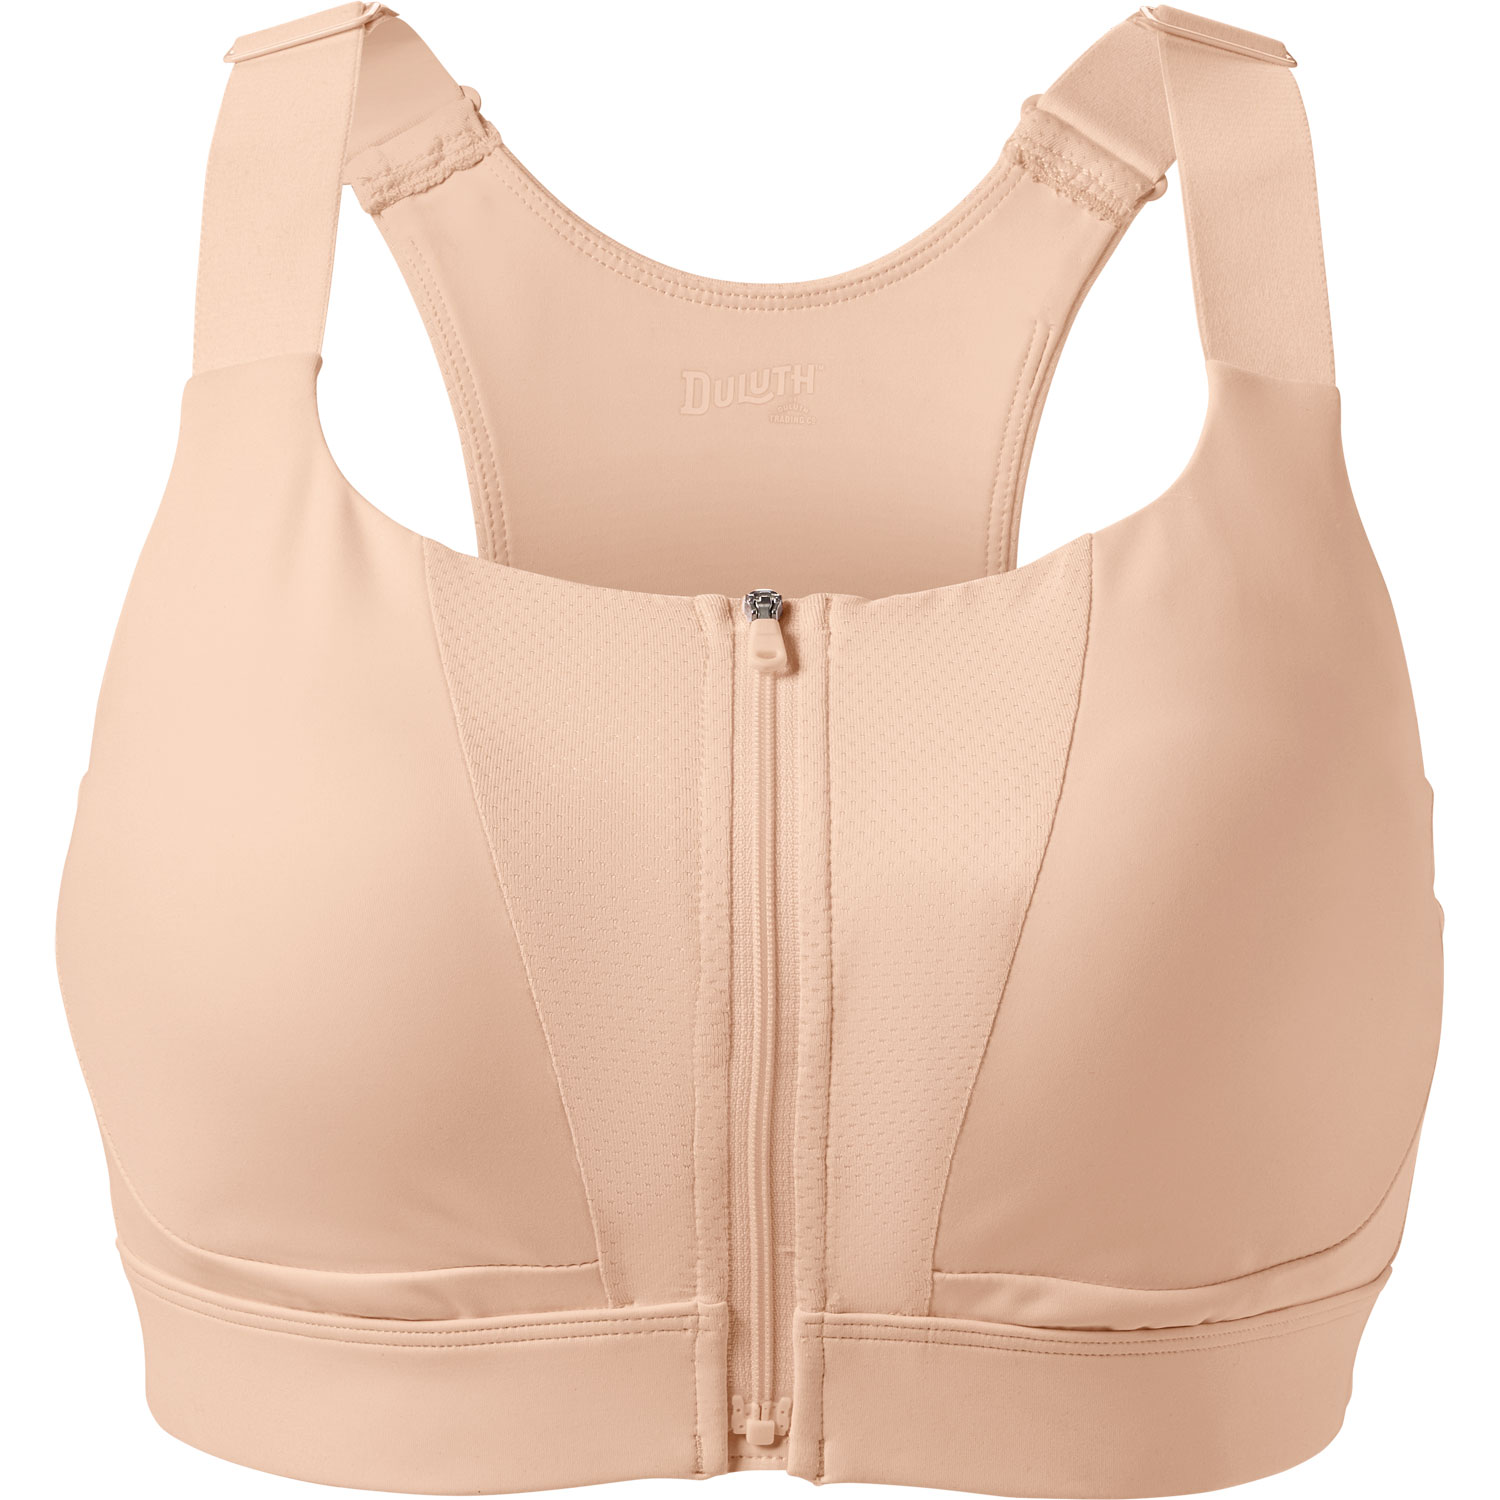  ZYLDDP Sports Bra High Impact Zip Front Adjustable Straps  Strappy Without Underwire Padded (Color : Bean Brown, Size : 40D) :  Clothing, Shoes & Jewelry